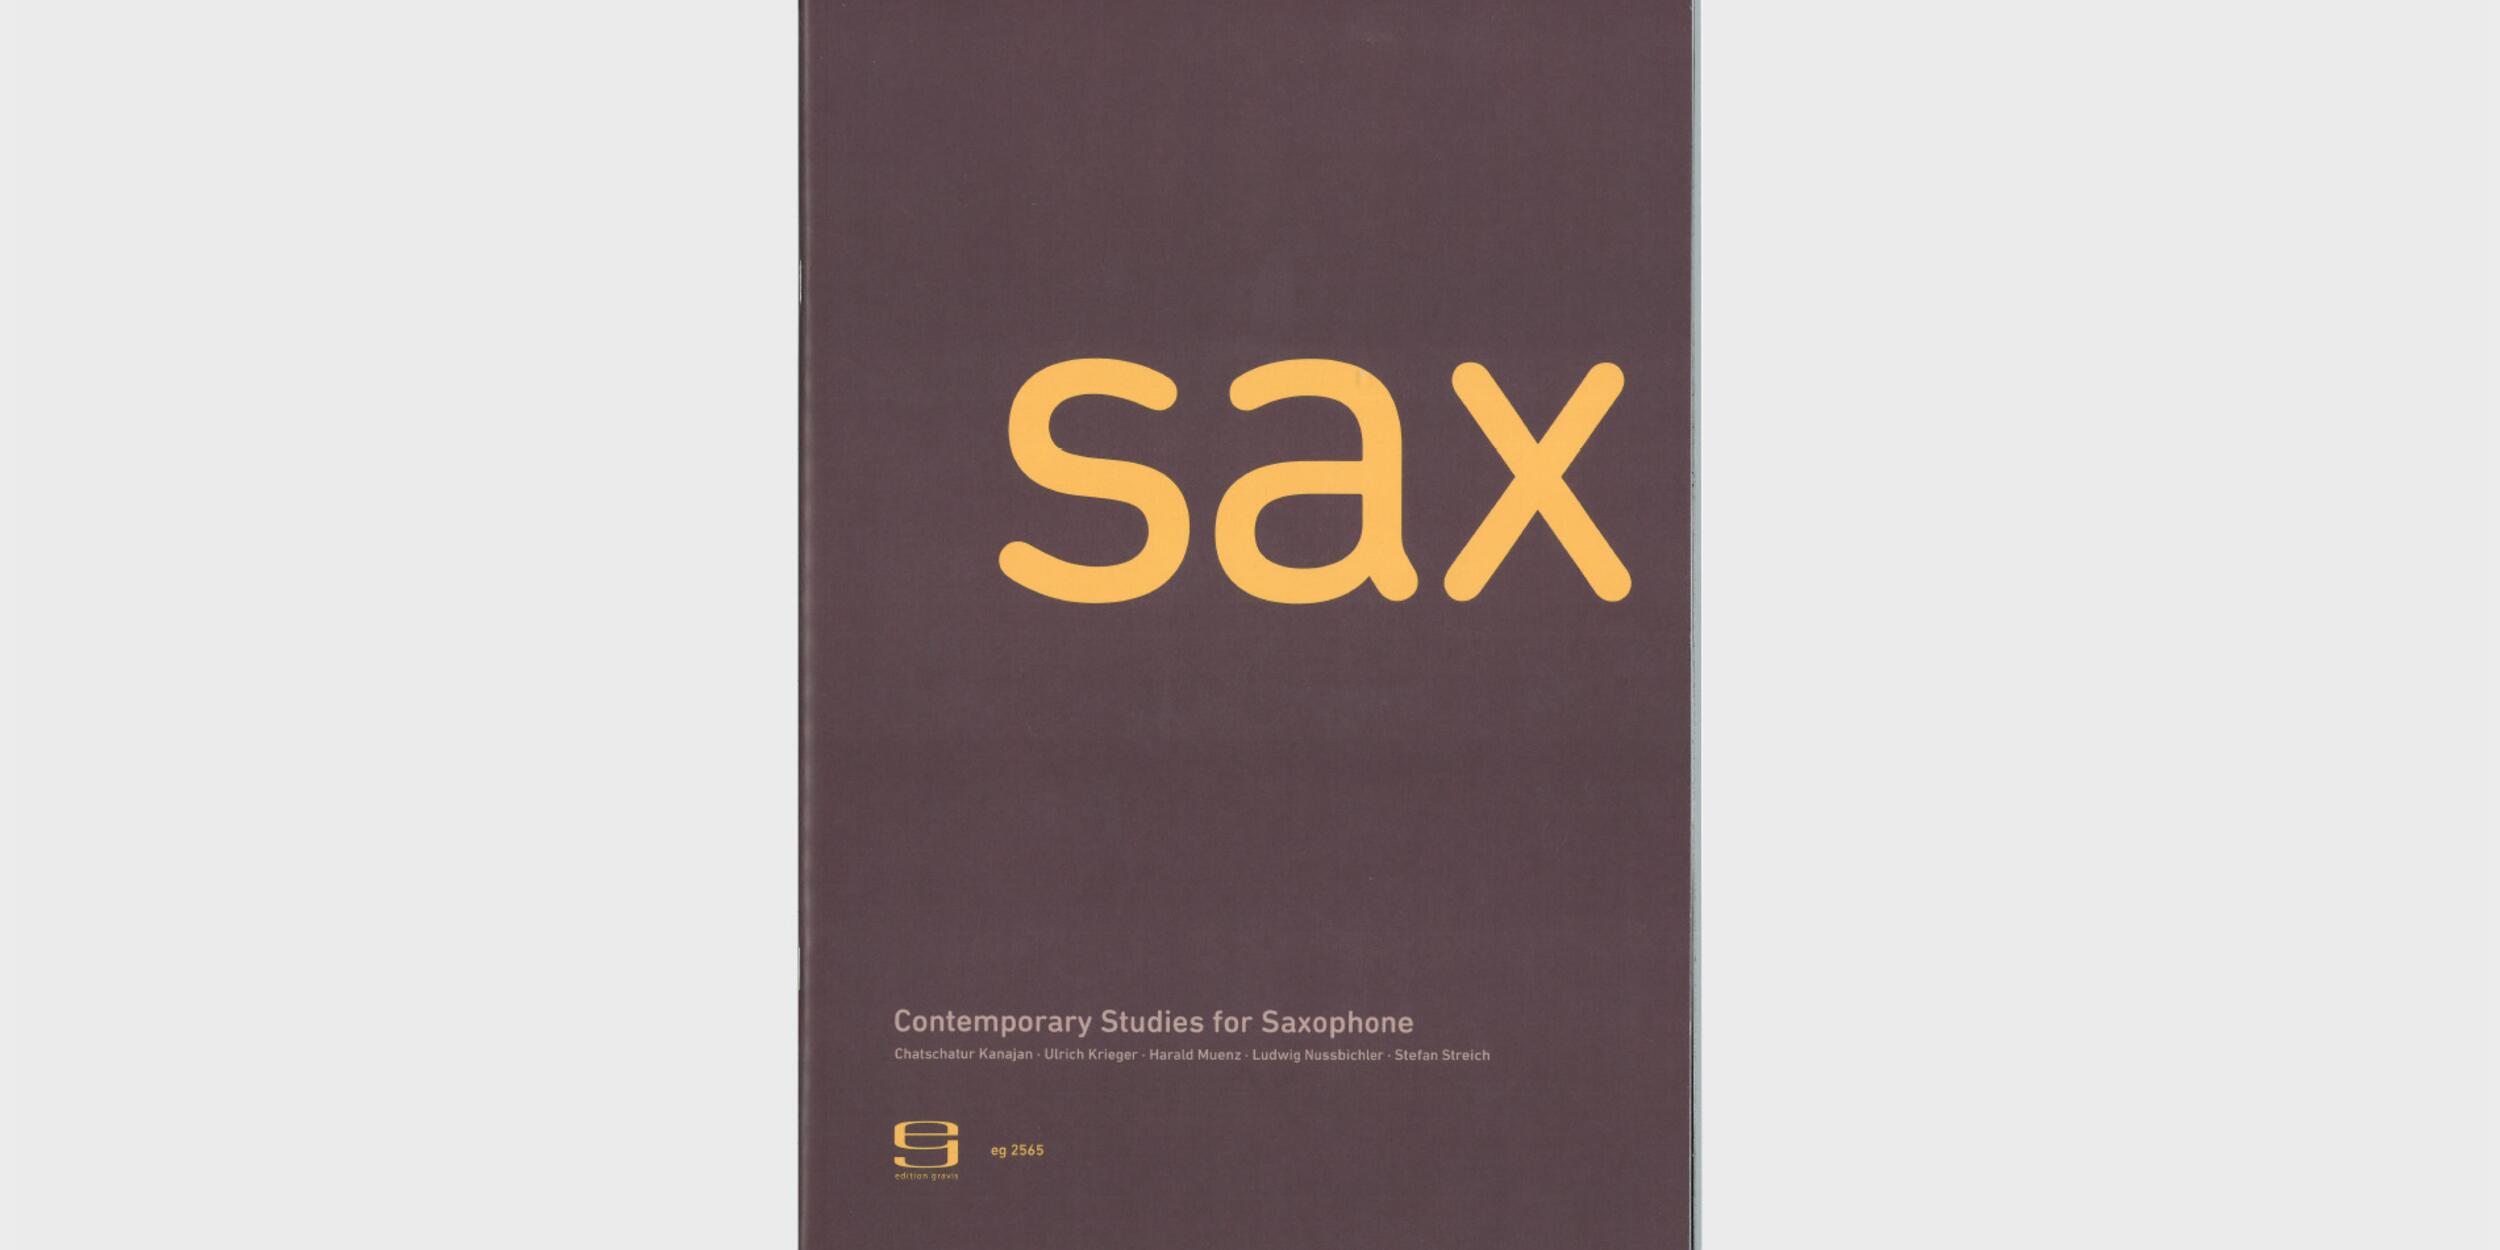 Contemporary Studies for Saxophone